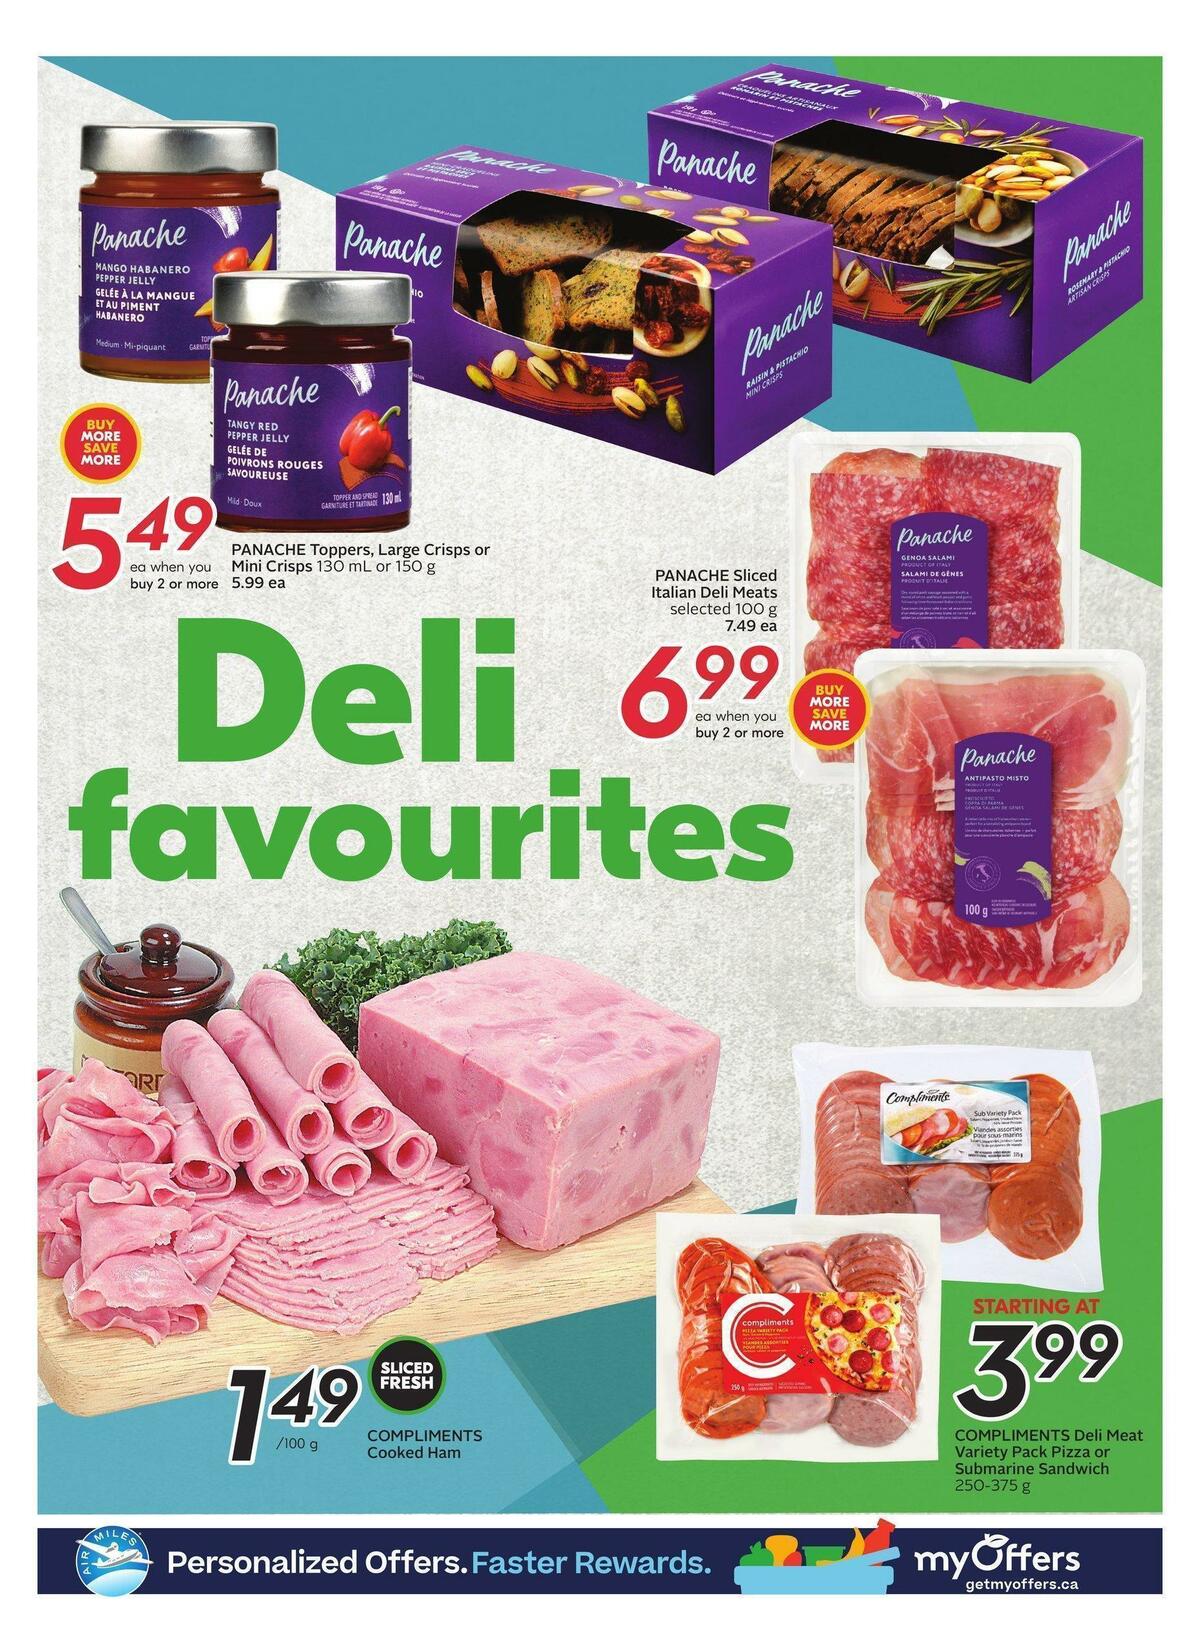 Sobeys Flyer from August 12